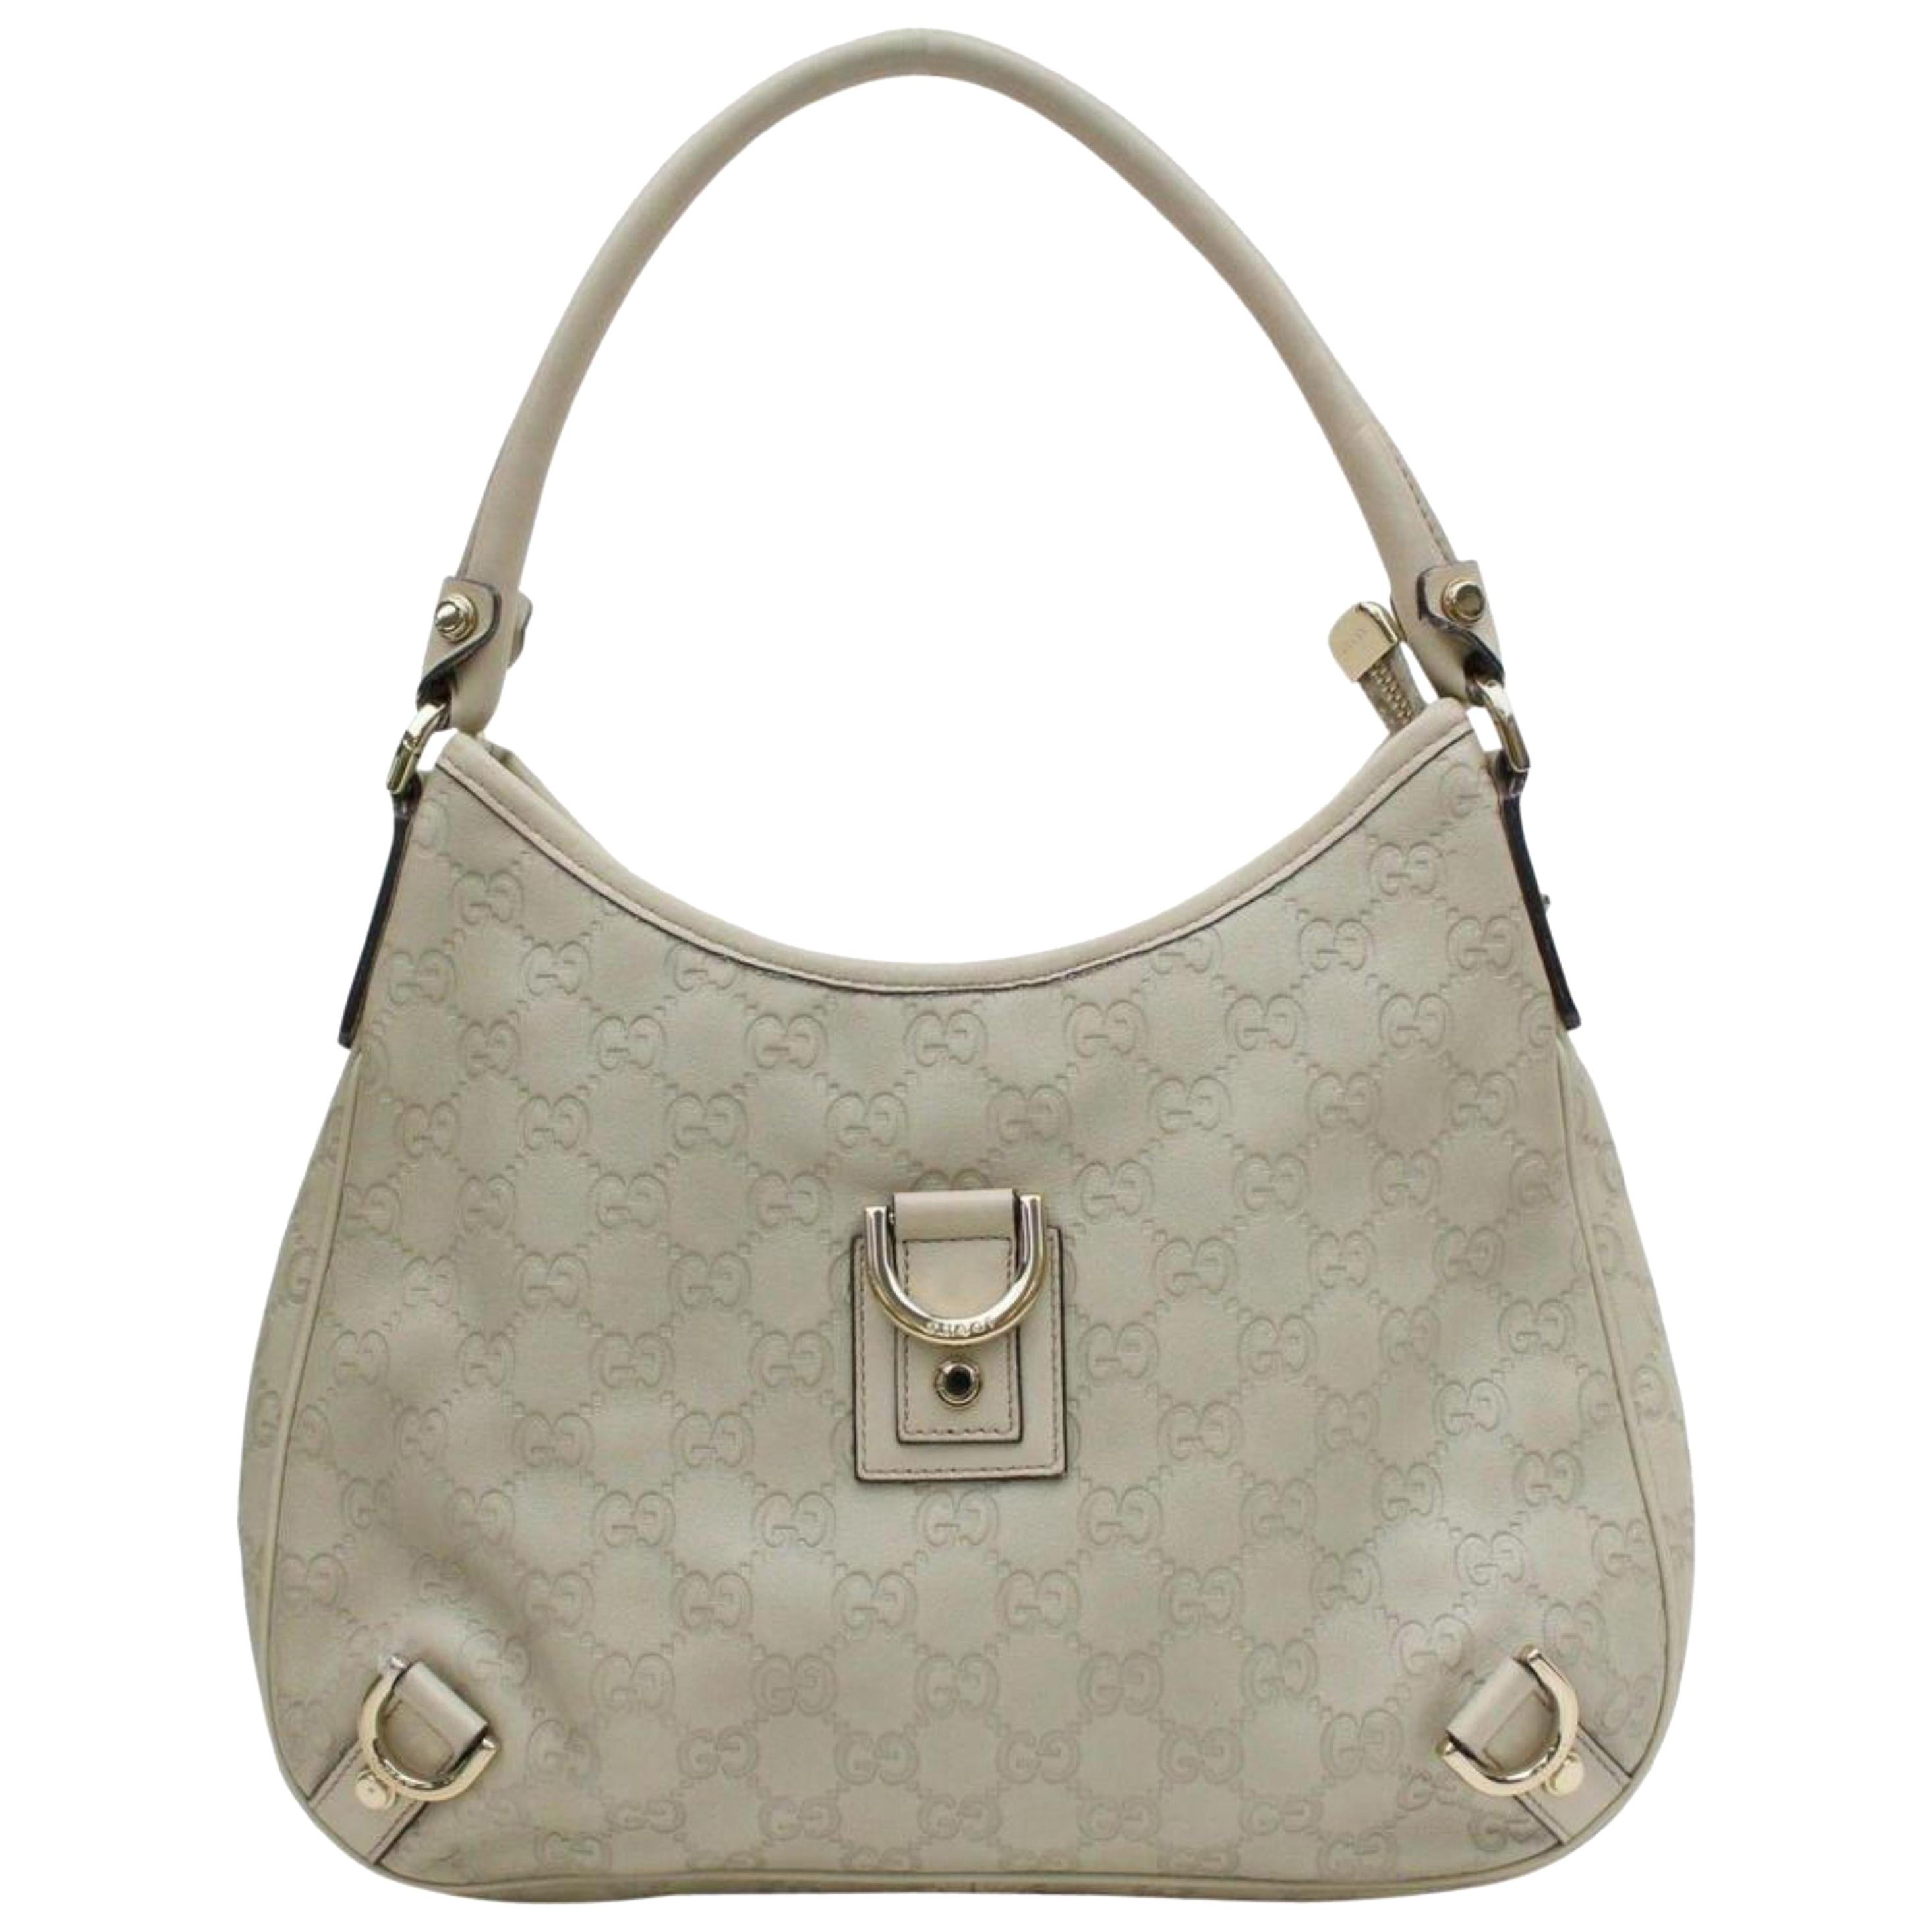 Gucci Ivory Guccissima D Ring Hobo 868308 Cream Leather Shoulder Bag For Sale